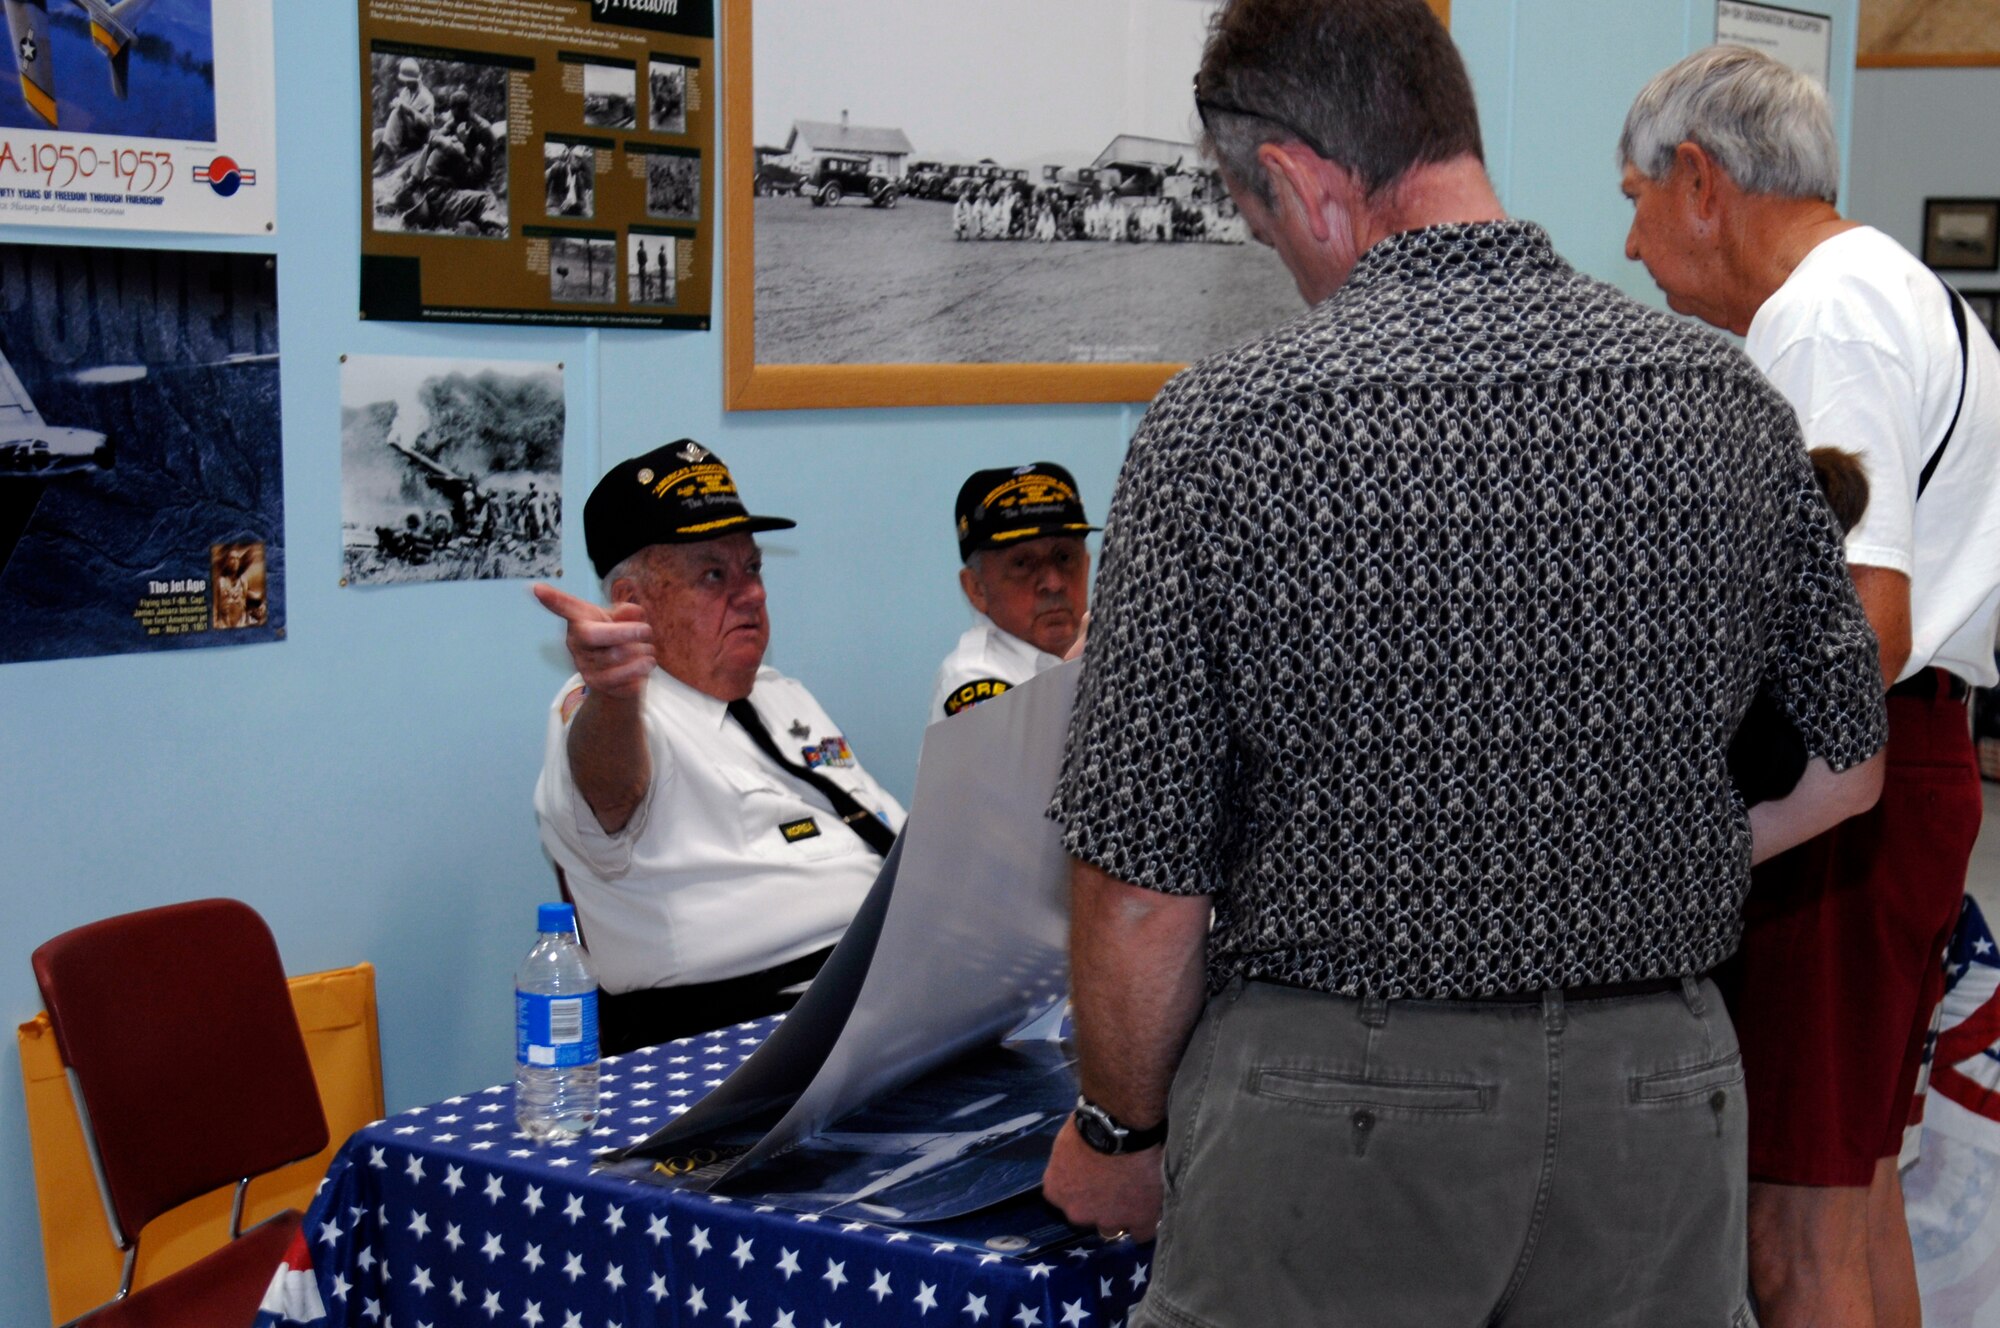 Korean War Veterans, retired Lt. Col. Jerry Teachout and retired Army Master Sgt. Robert Hempel educate visitors of the South Dakota Air and Space Museum of their experiences during the conflict June 25. The display commemorated the 58th anniversary of the beginning of hostilities in Korea.  (U.S. Air Force photo/Airman Matthew Flynn)